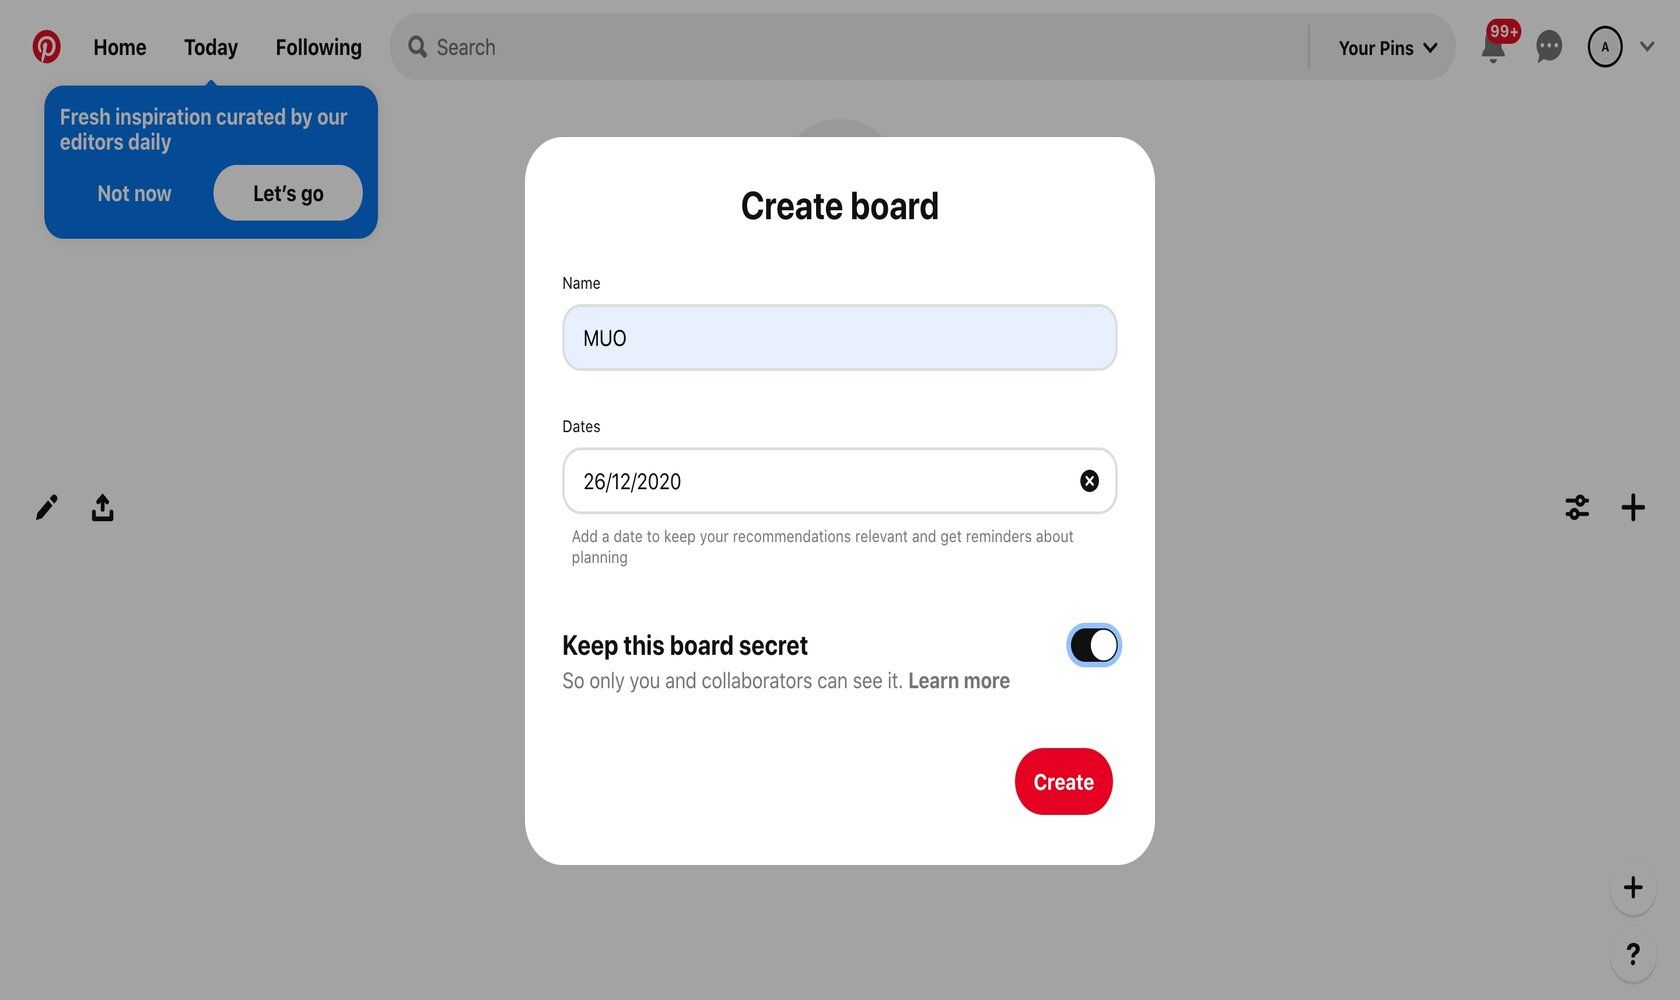 How To Use Secret Boards On Pinterest